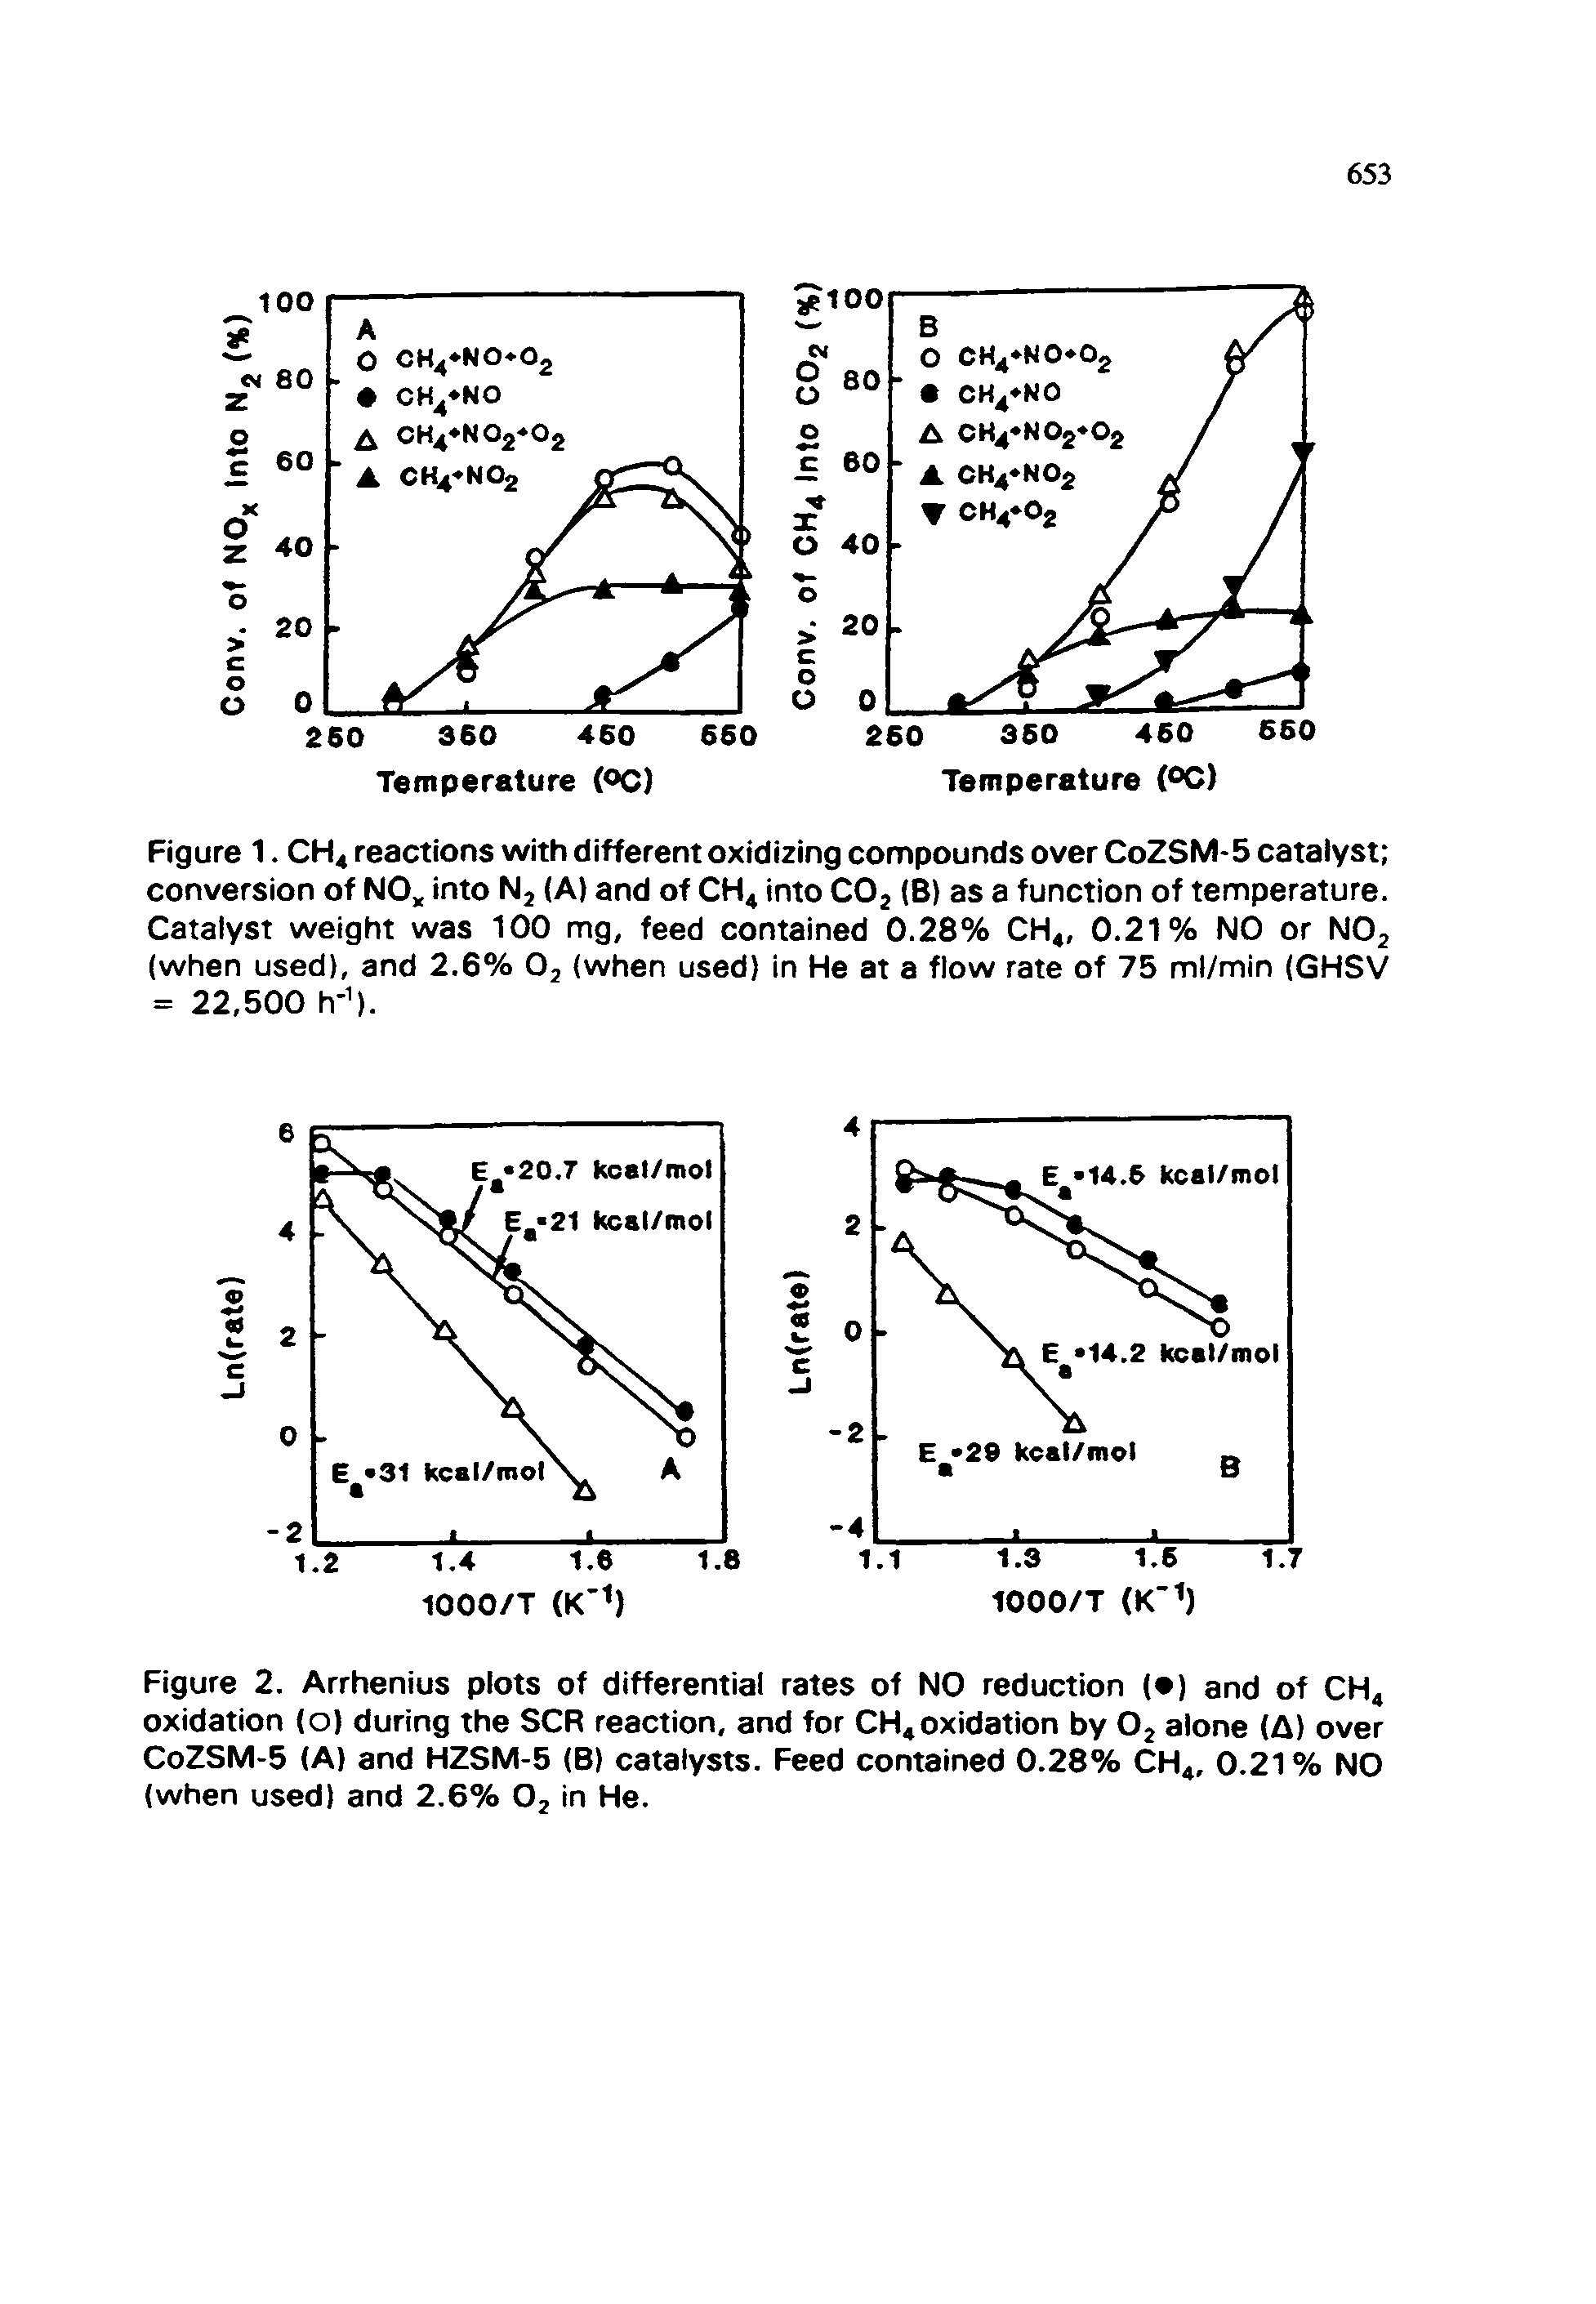 Figure 2. Arrhenius plots of differential rates of NO reduction ( ) and of CH4 oxidation (o) during the SCR reaction, and for CH4oxidation by Oj alone (A) over CoZSM-5 (A) and HZSM-5 (B) catalysts. Feed contained 0.28% CH4, 0.21 % NO (when used) and 2.6% O2 in He.